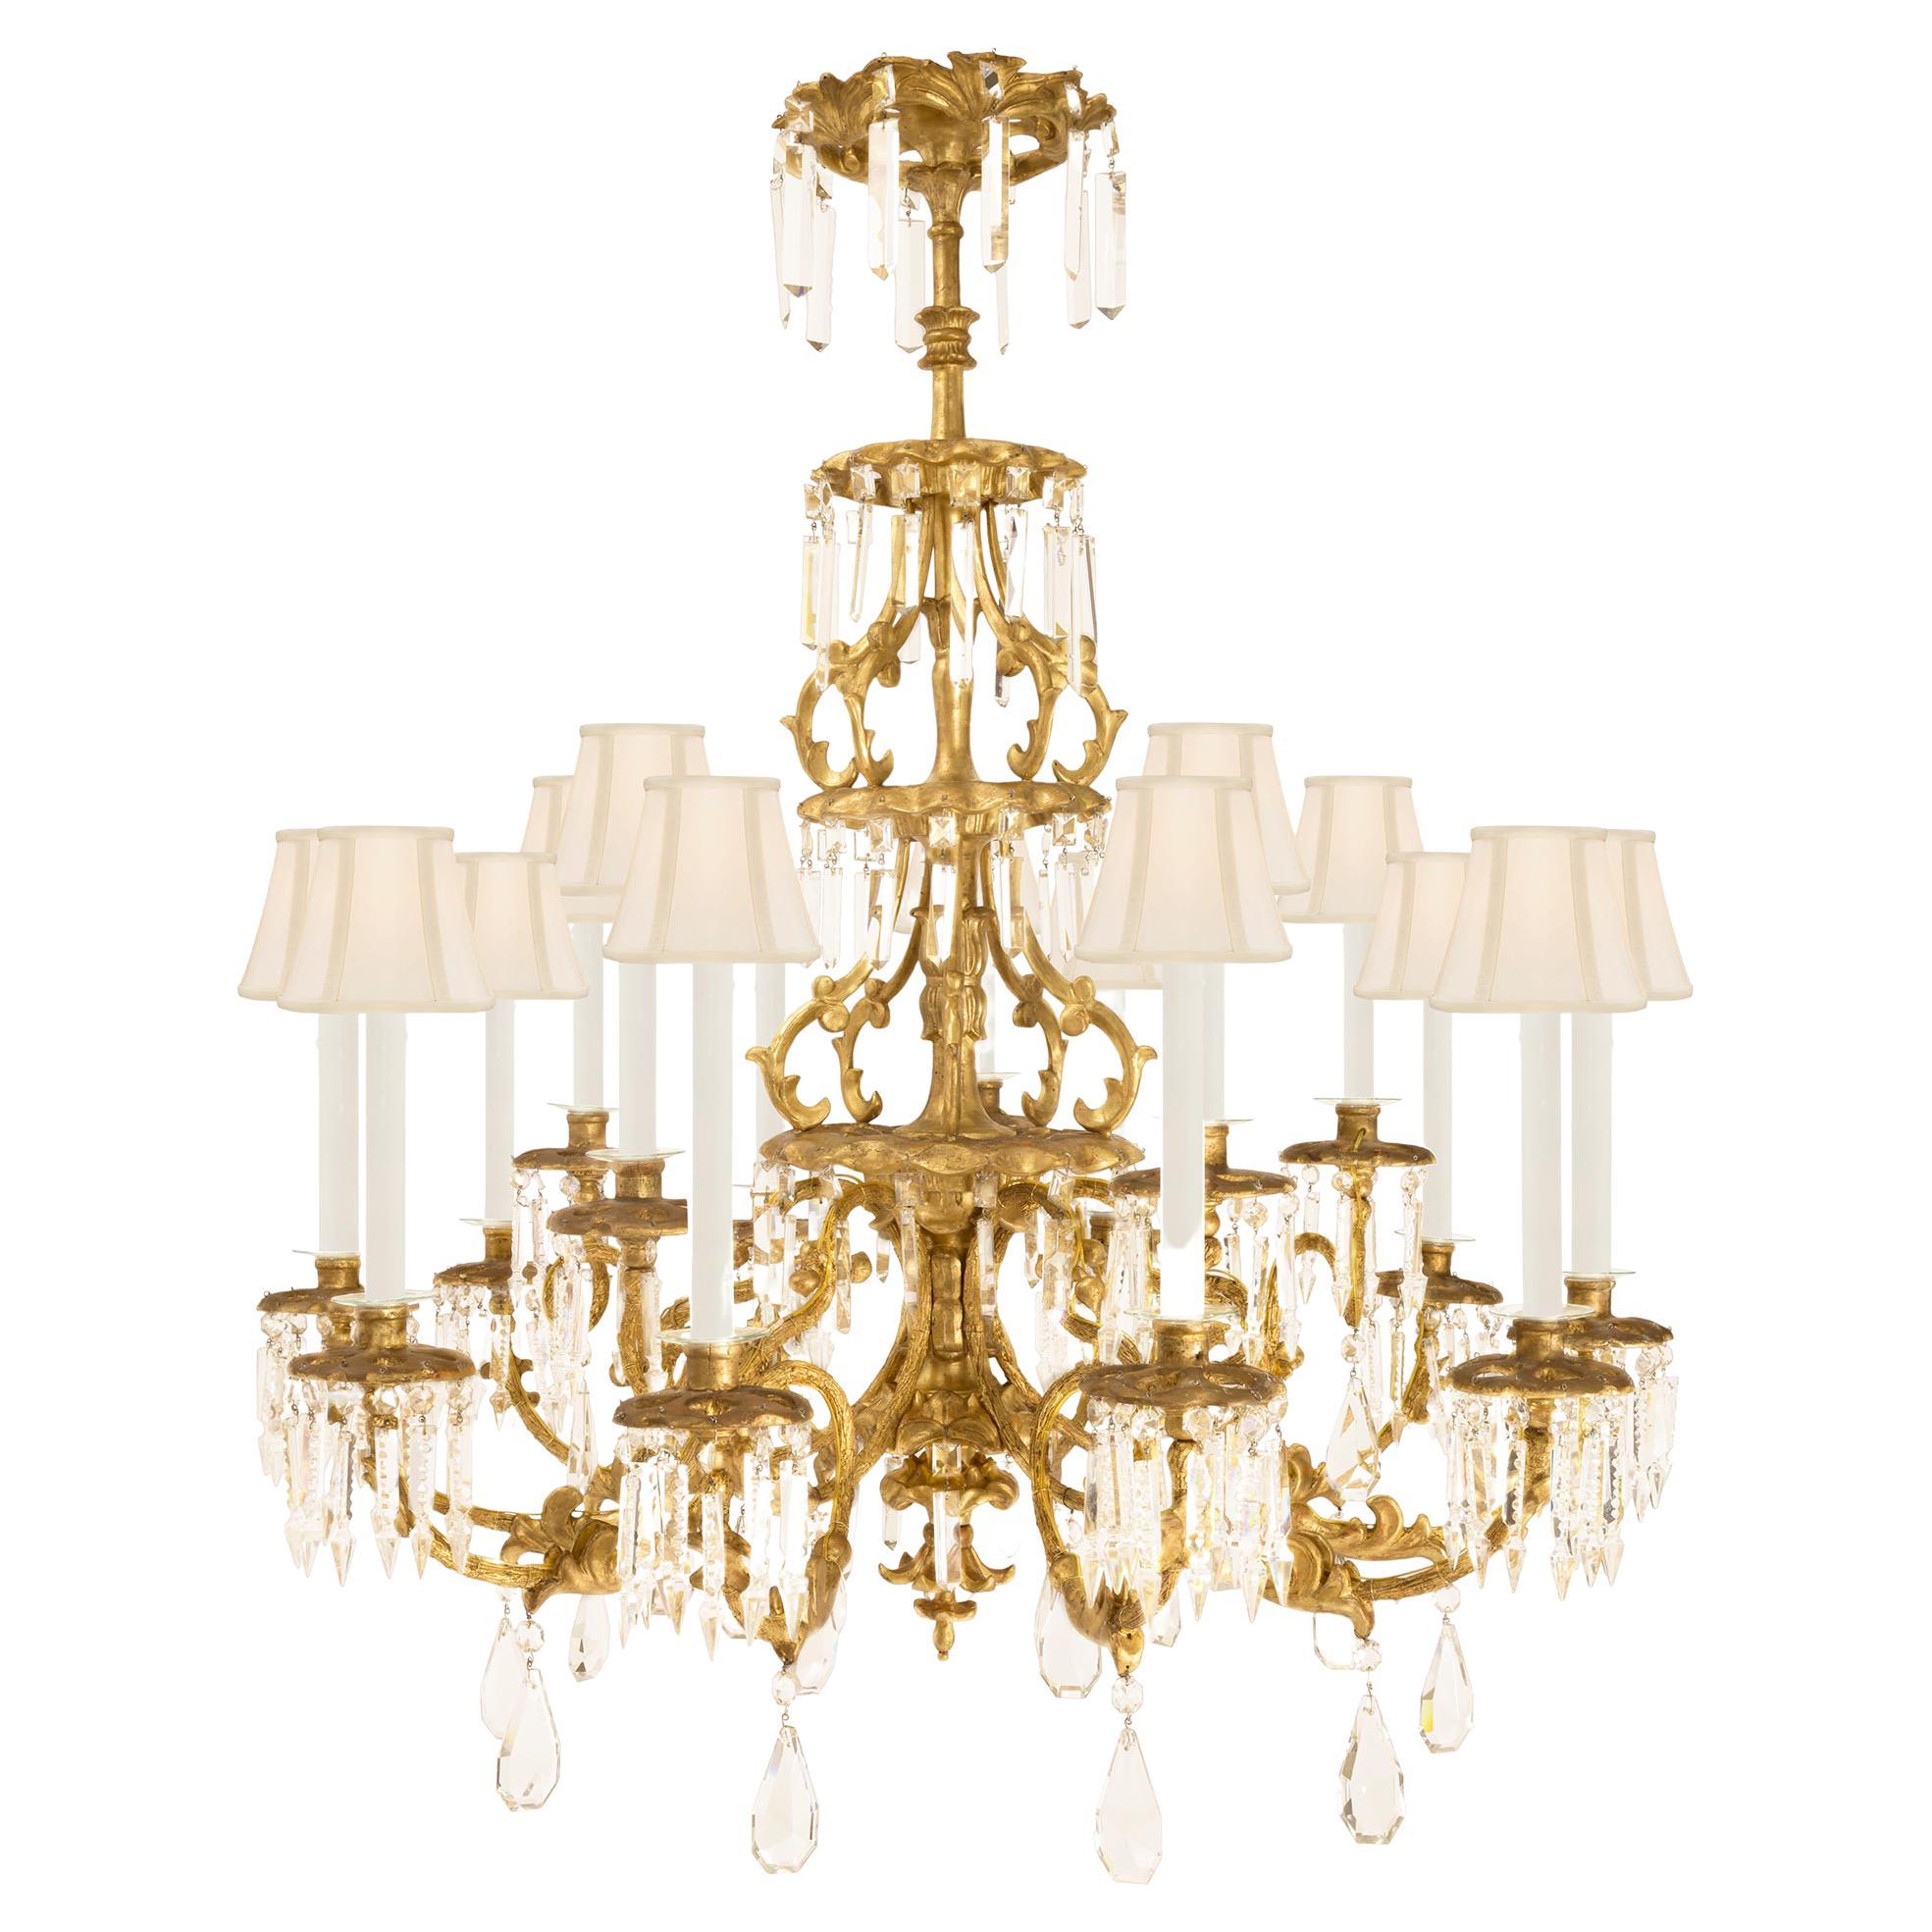 Italian Early 19th Century Tuscan Giltwood Chandelier For Sale